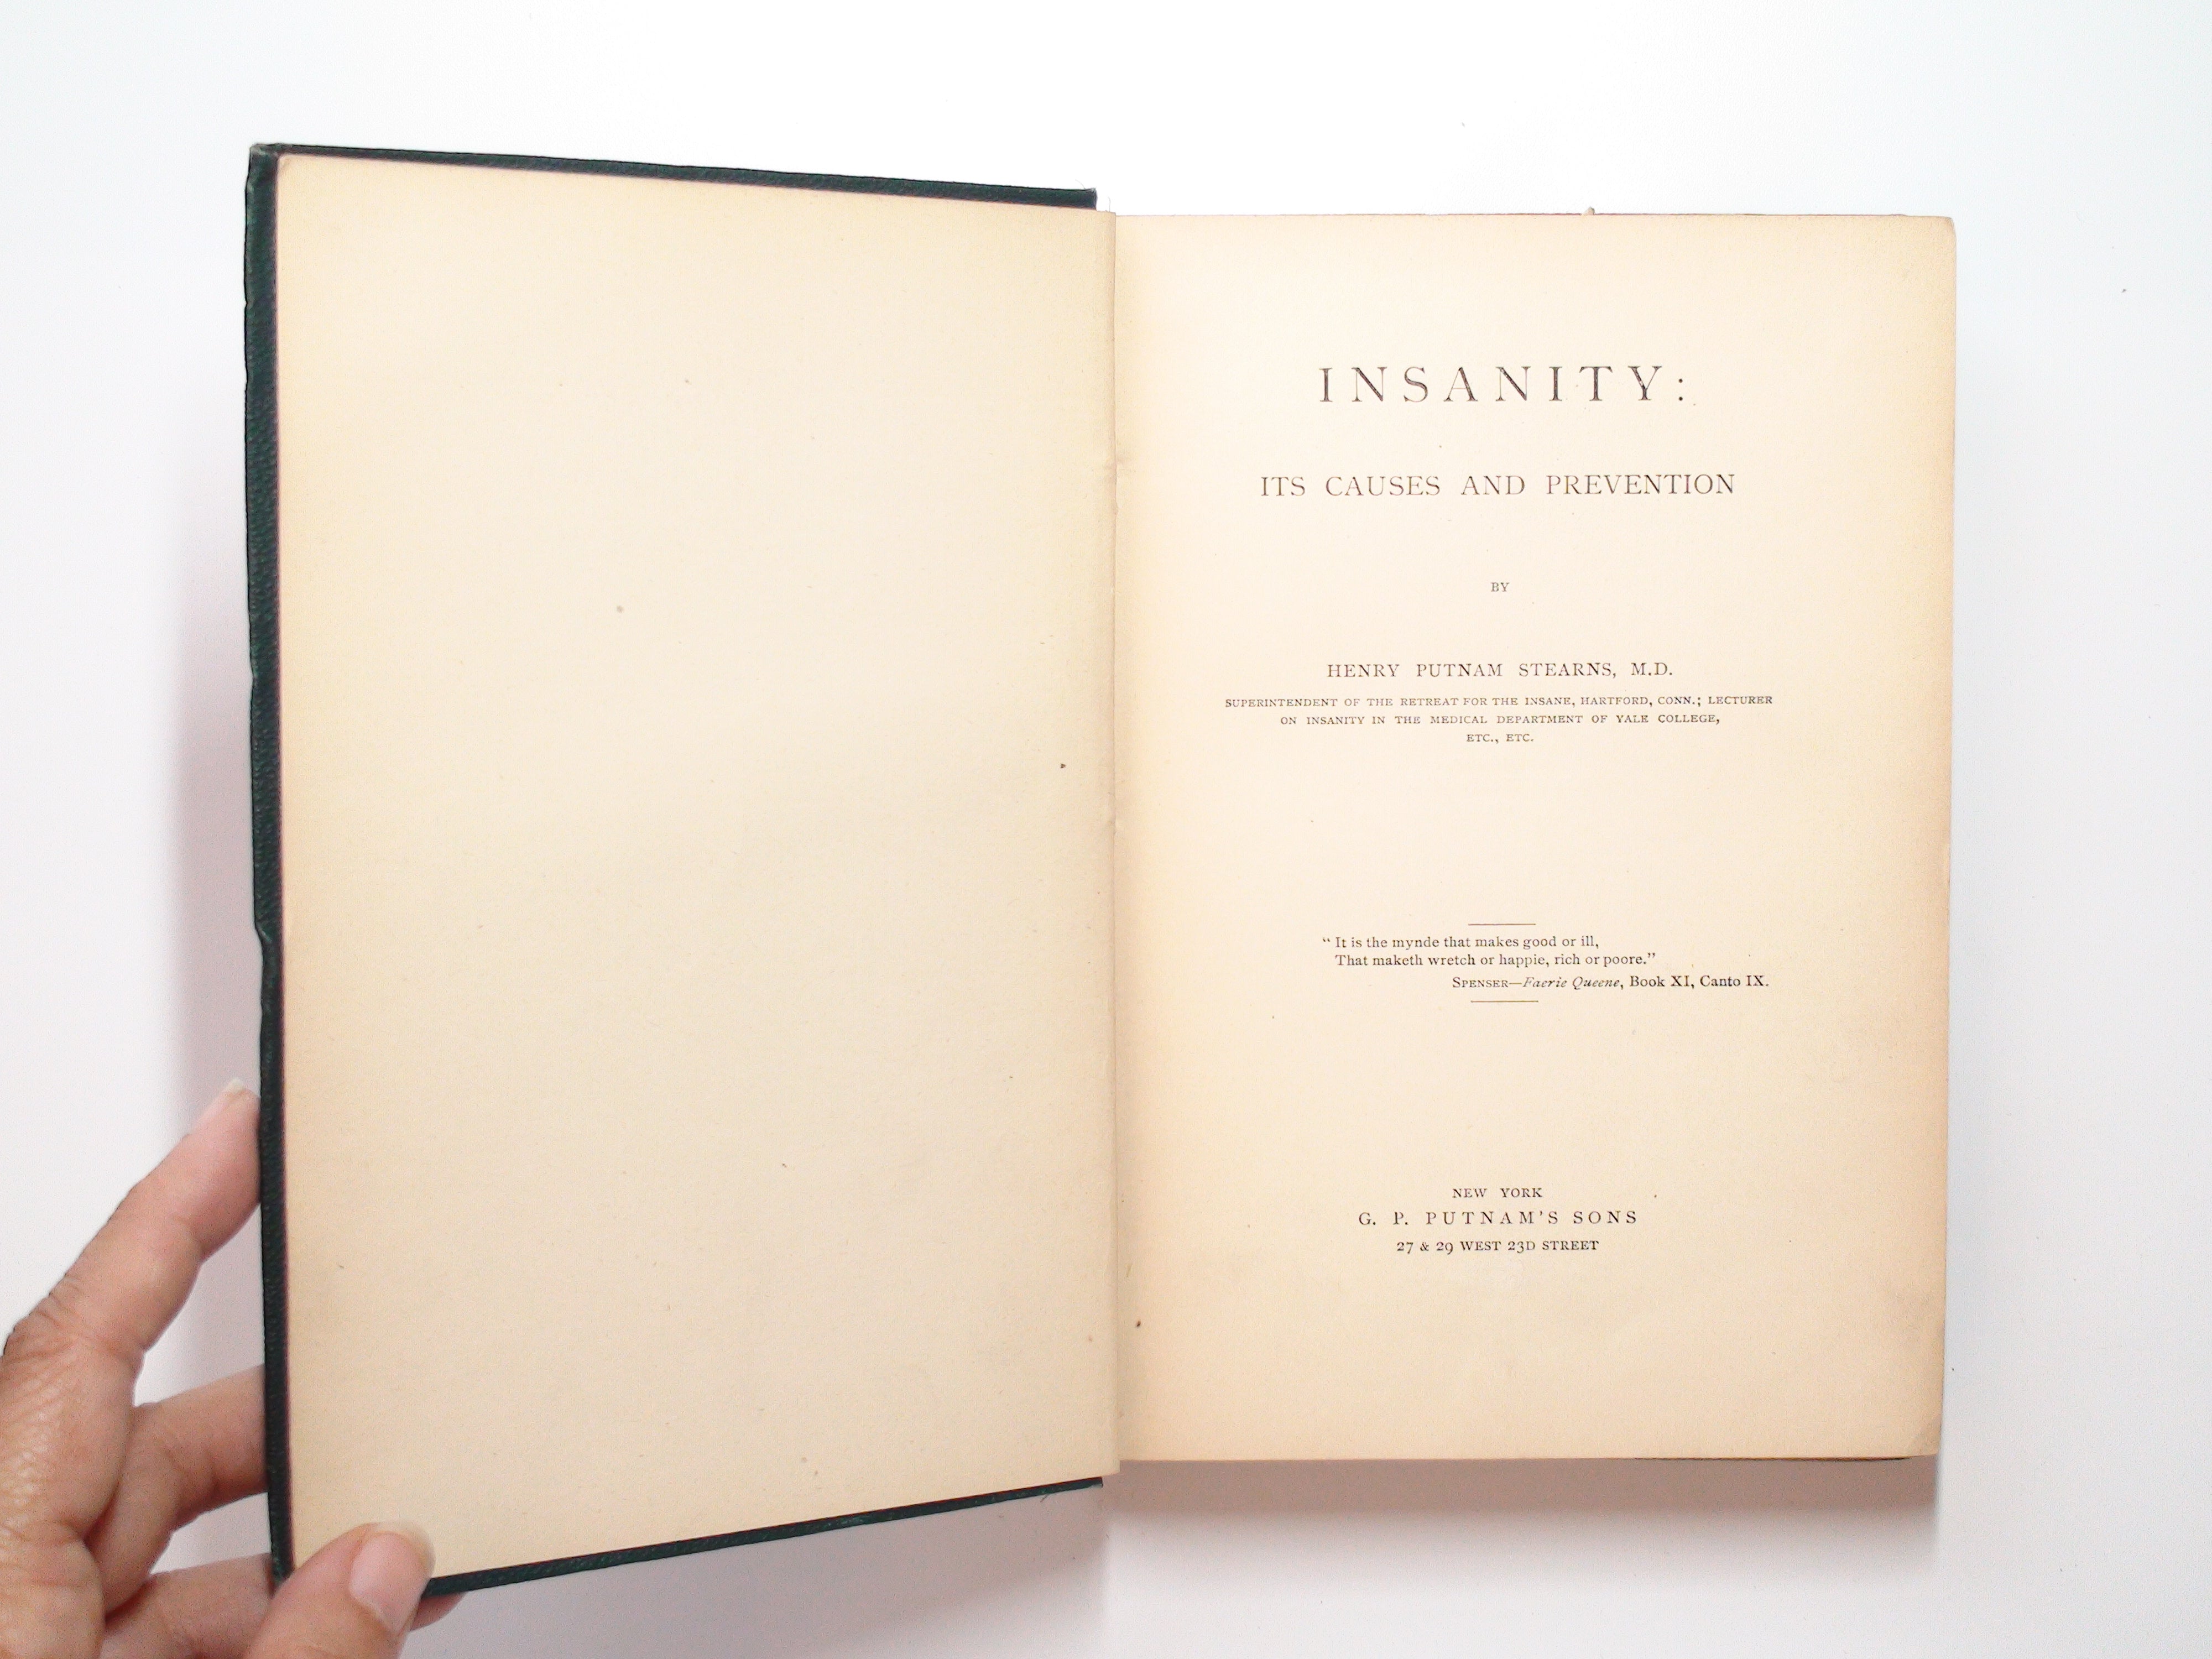 Insanity, Its Causes and Prevention, Henry Putnam Stearns, 1st ed, 1883